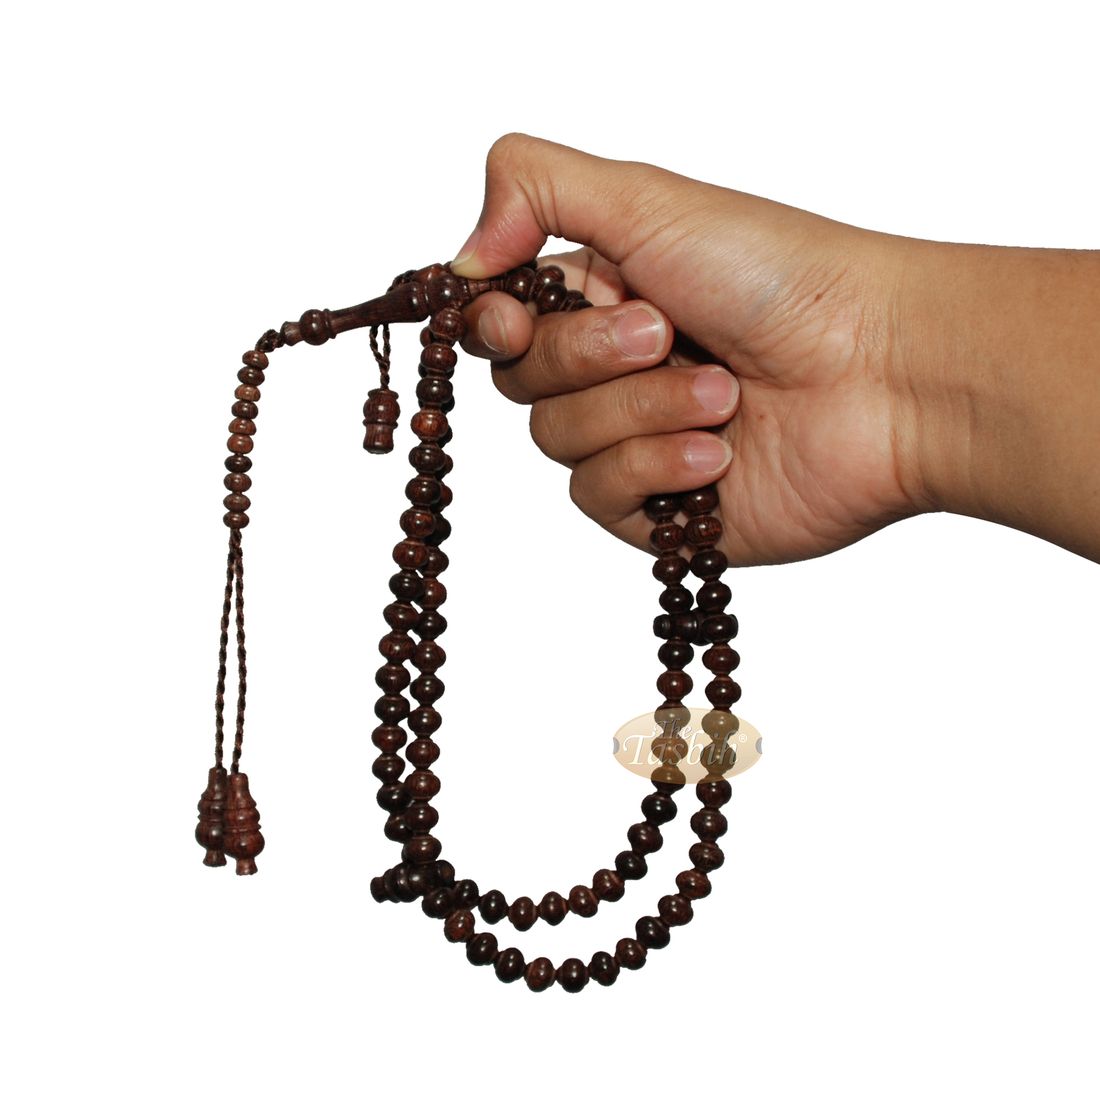 Handcrafted Tamarind Wood Tasbih Prayer Beads with 8x9mm Contoured Style 99-bead